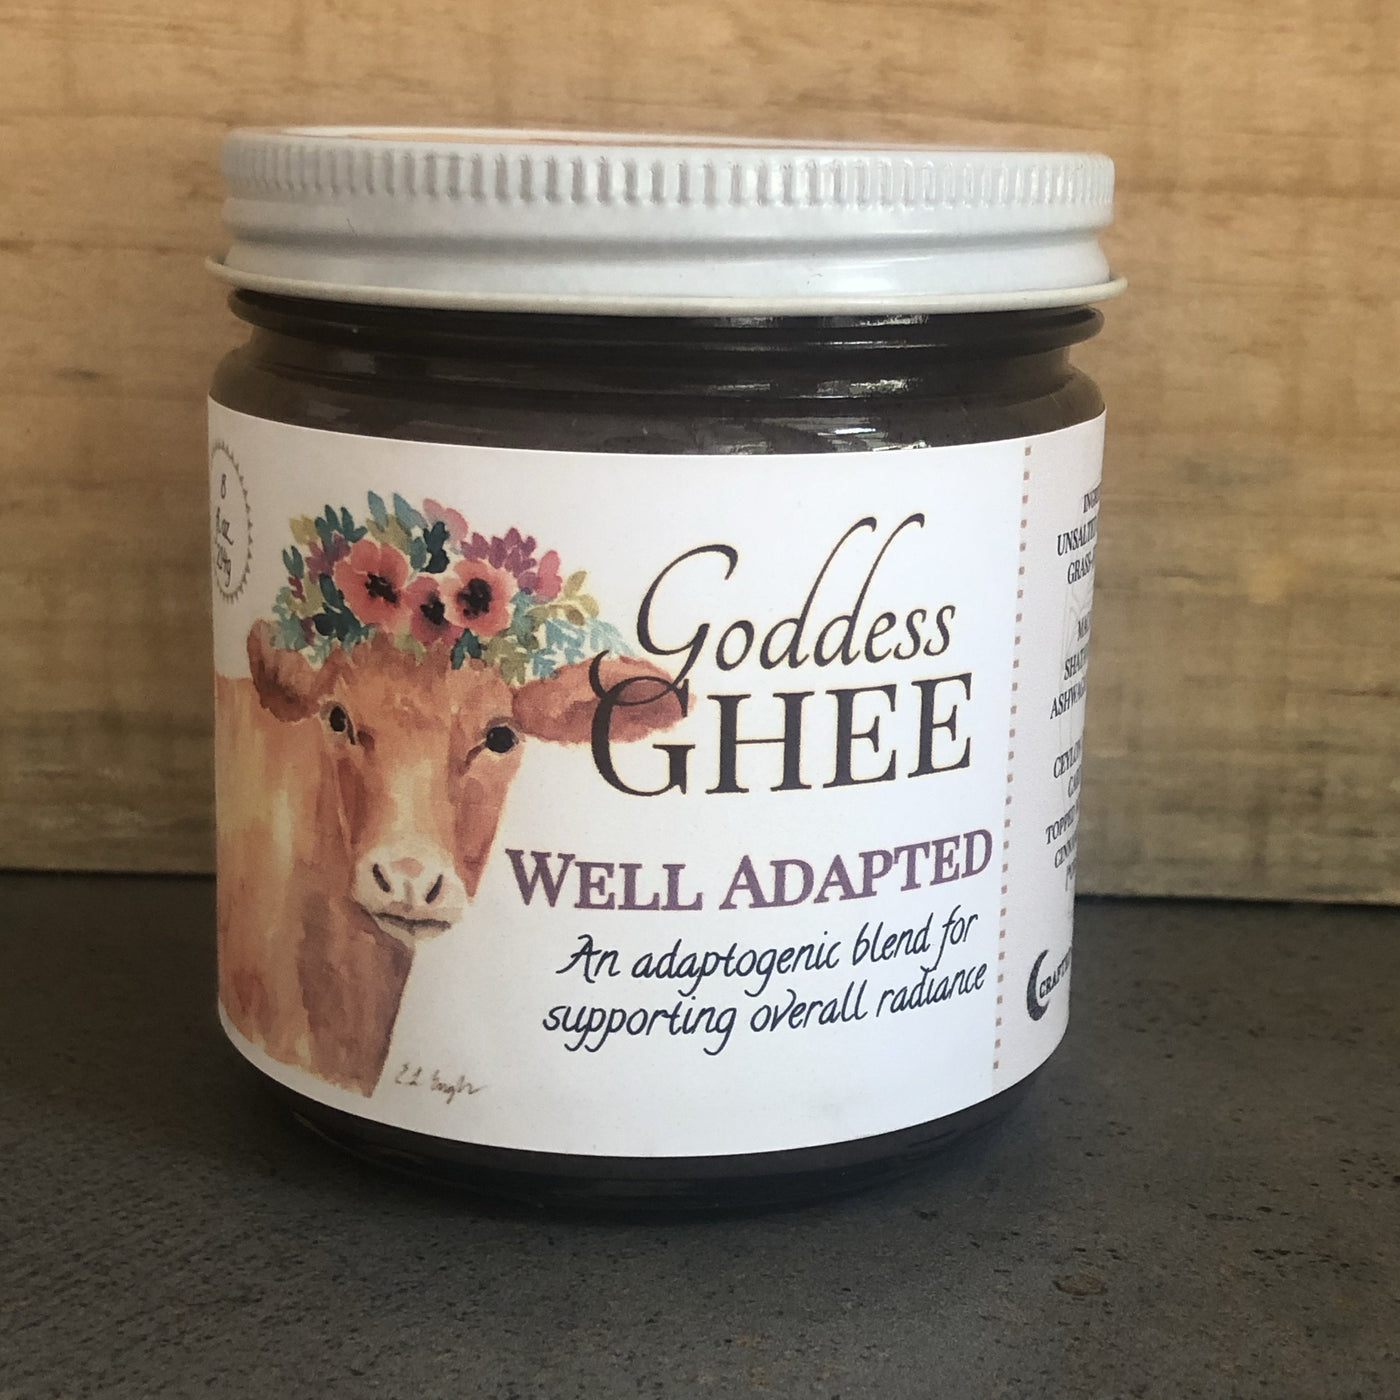 Local "Well Adapted" Ghee by Goddess Ghee, 9 Ounces